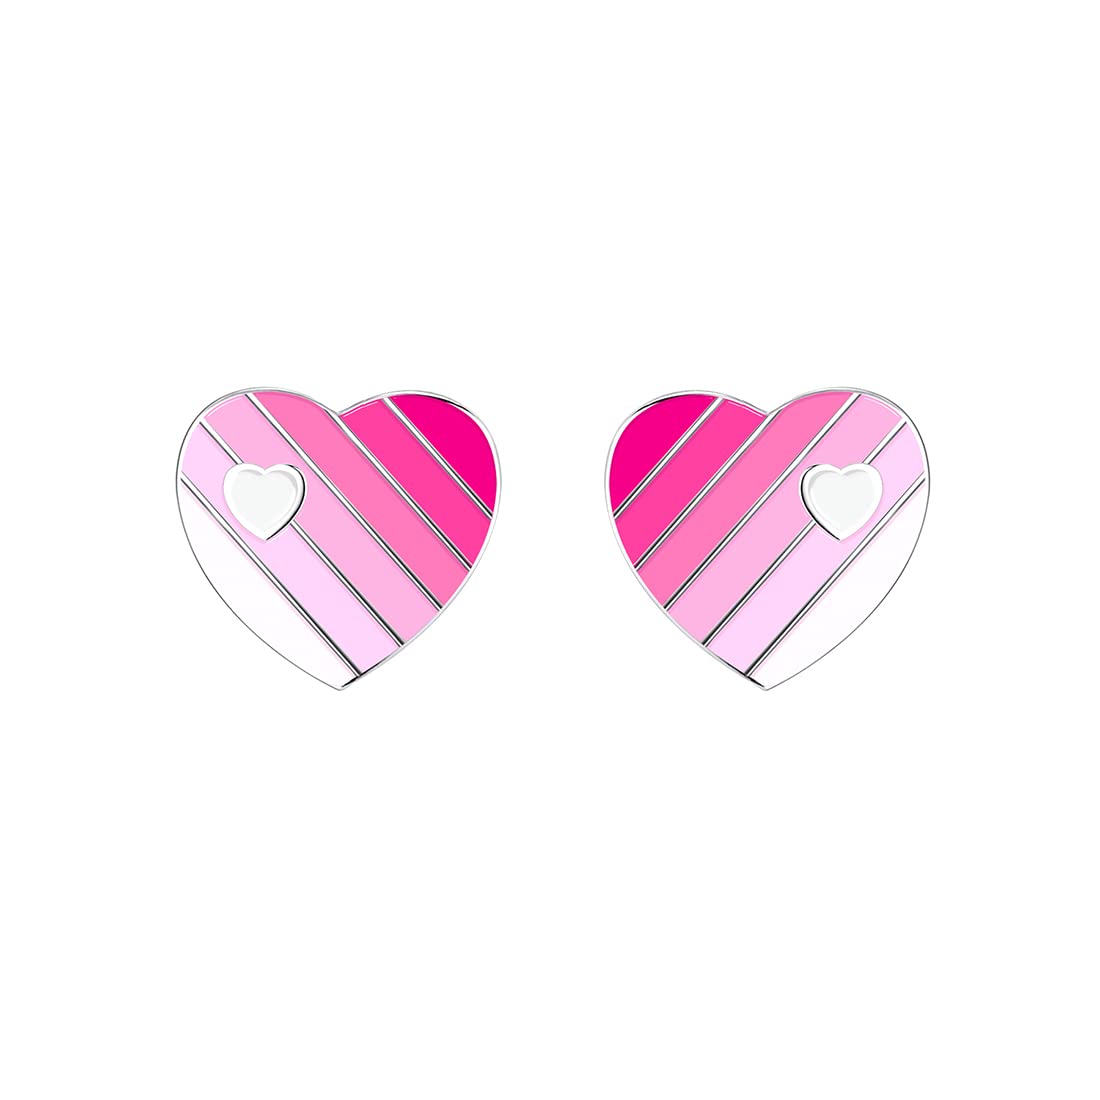 Raajsi by Yellow Chimes 925 Sterling Silver Stud Earring for Girls & Kids Melbees Kids Collection Heart Designed | Birthday Gift for Girls Kids | With Certificate of Authenticity & 6 Month Warranty